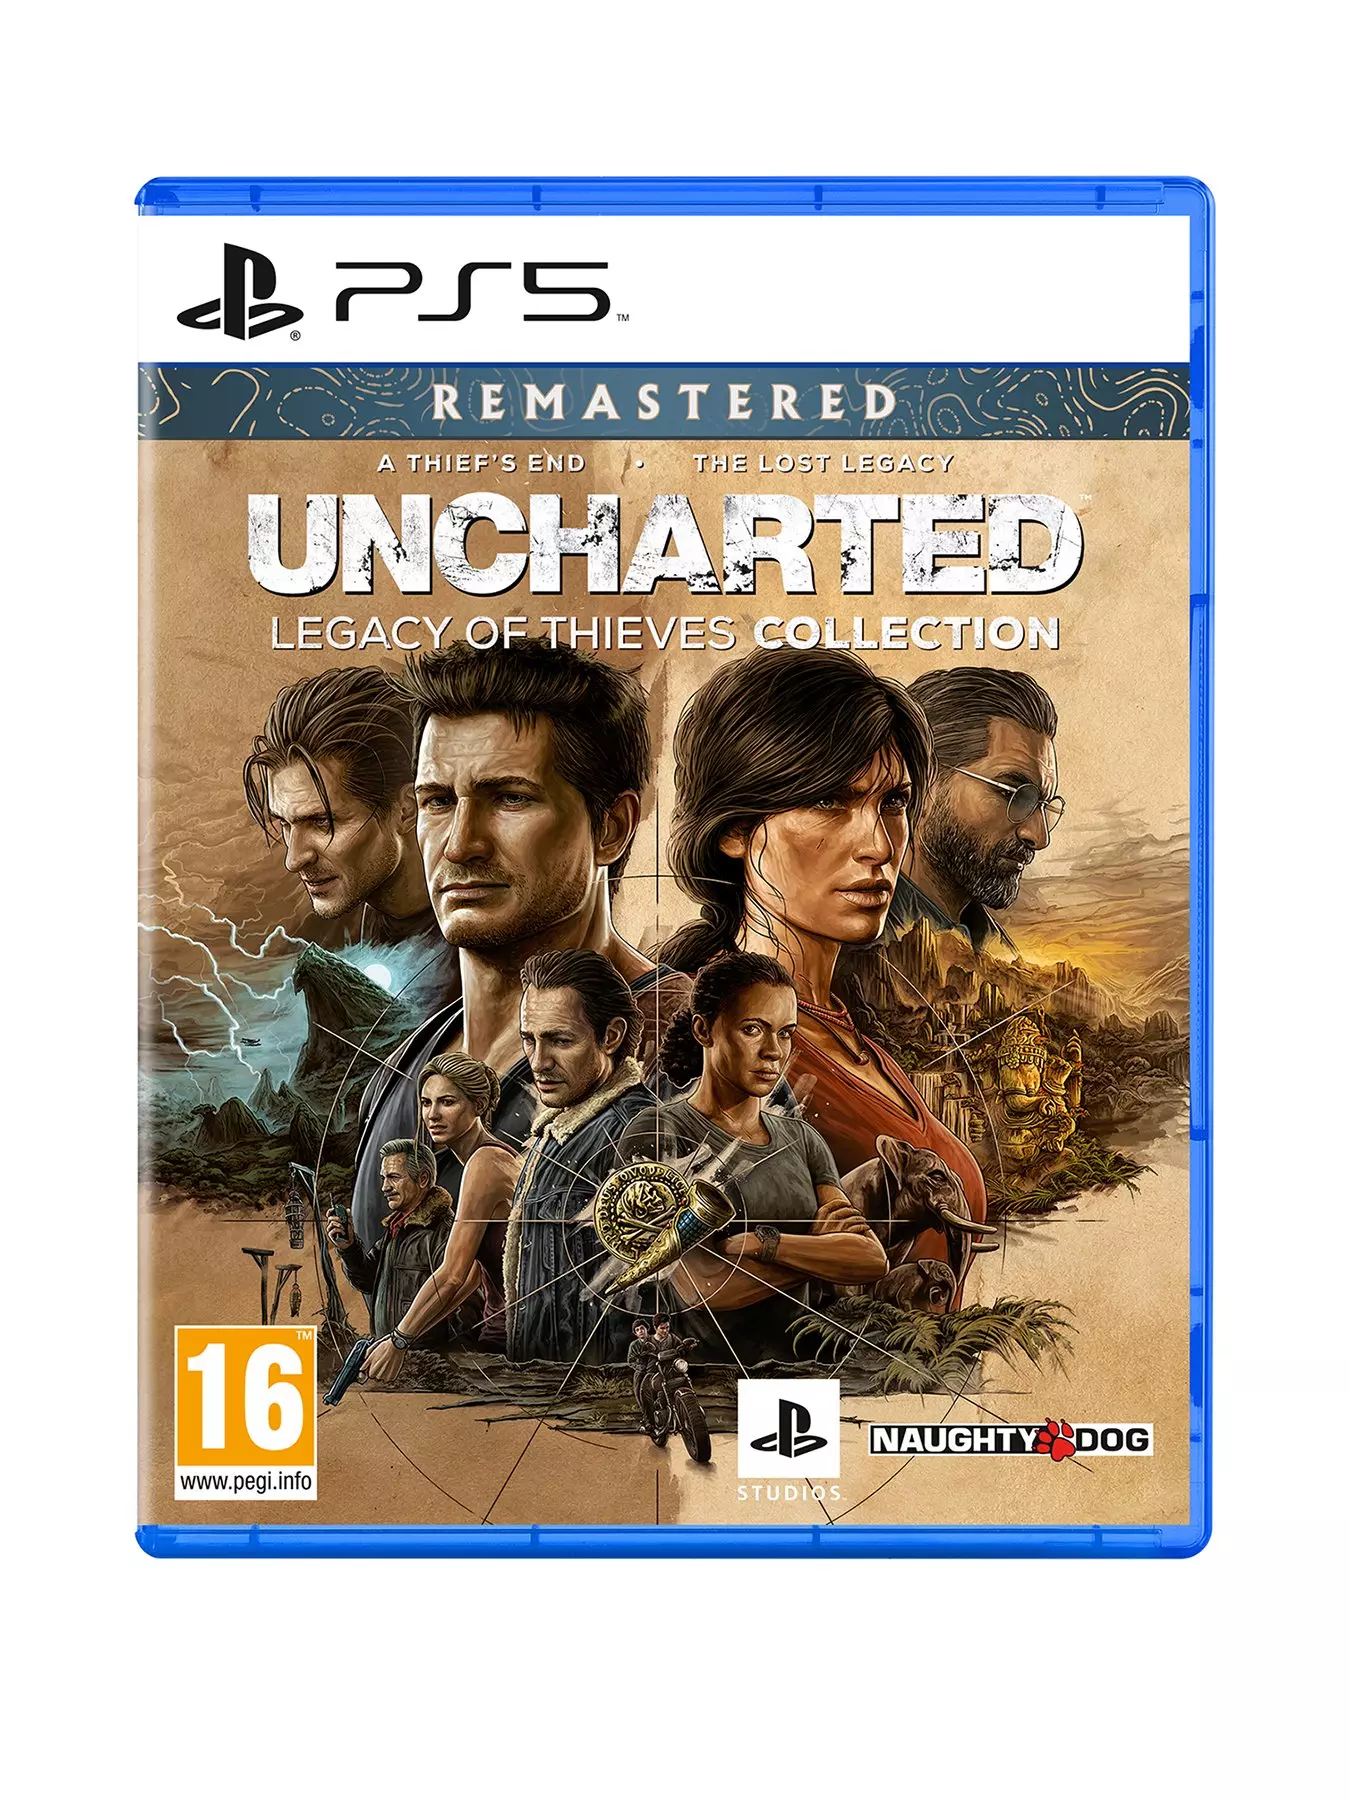 Uncharted 2' delivers high-octane PS3 adventure - The San Diego